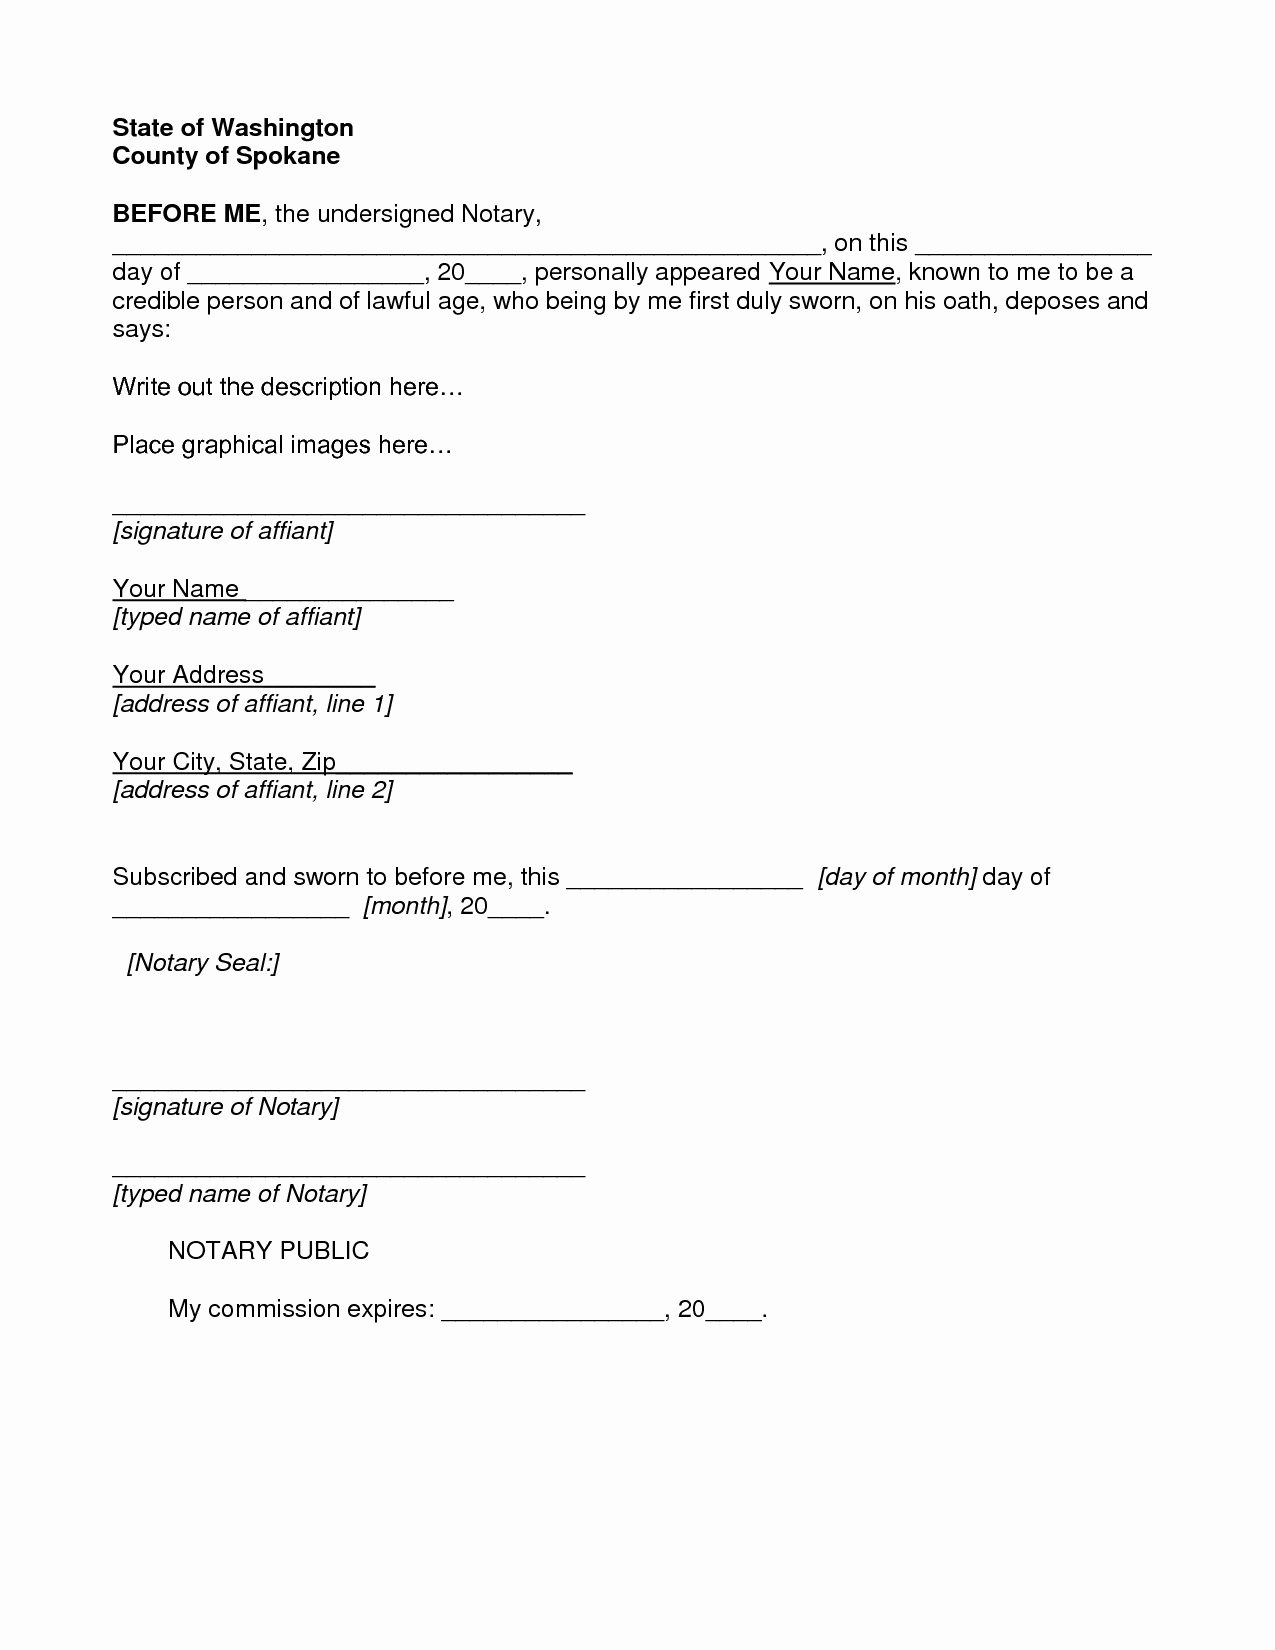 Canadian Notary Block Example - Notaries and Notary News: Free Texas Notary Certificates ...